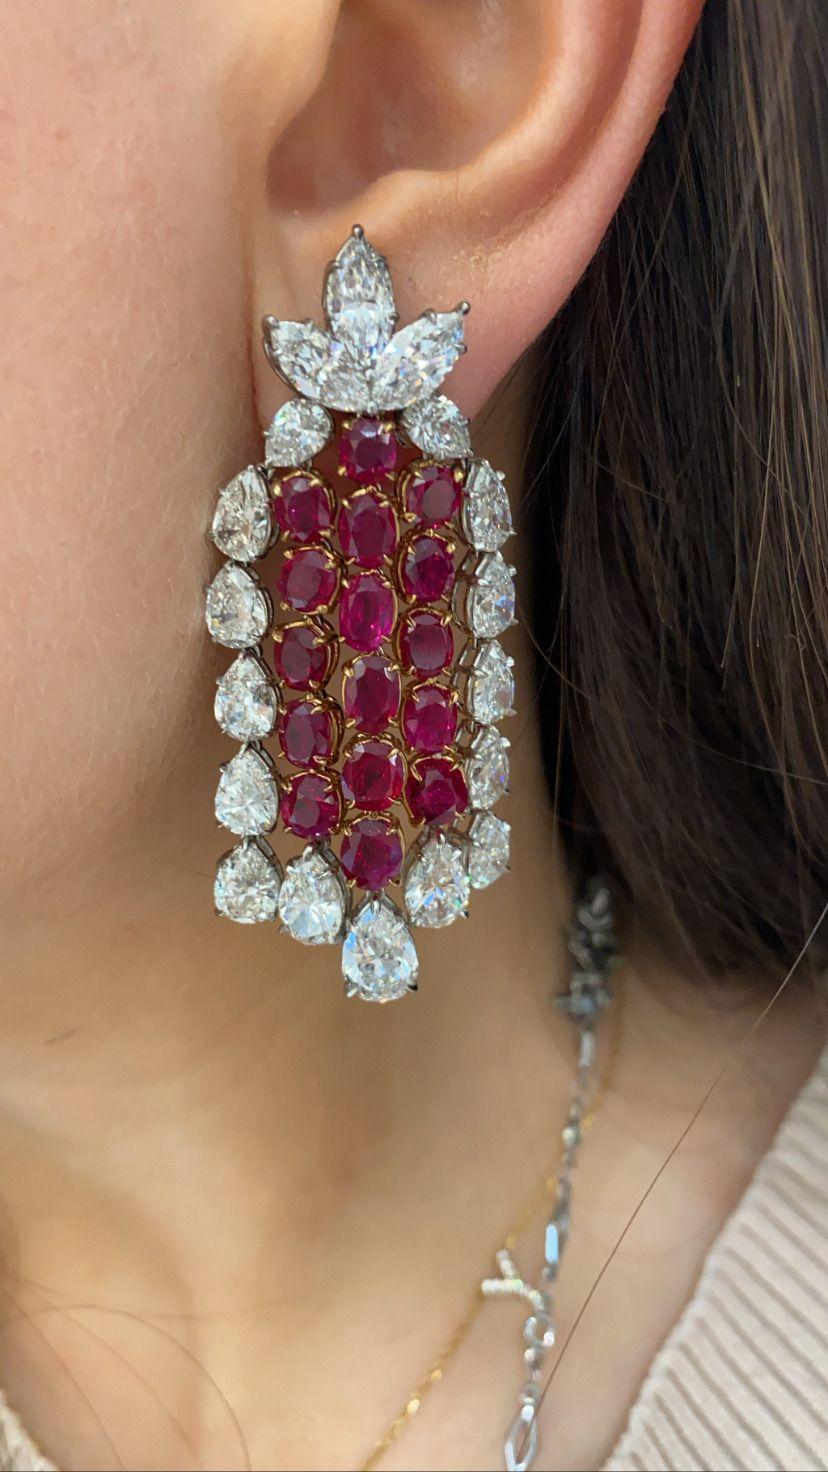 This One of a kind Harry Winston signed piece is truly a masterpiece. At the center of these jewels are 32 Unheated Rubies of Burma Origin set in 18 carat Yellow Gold surrounded by 26 carats of magnificent marquise and pear shaped diamonds set in